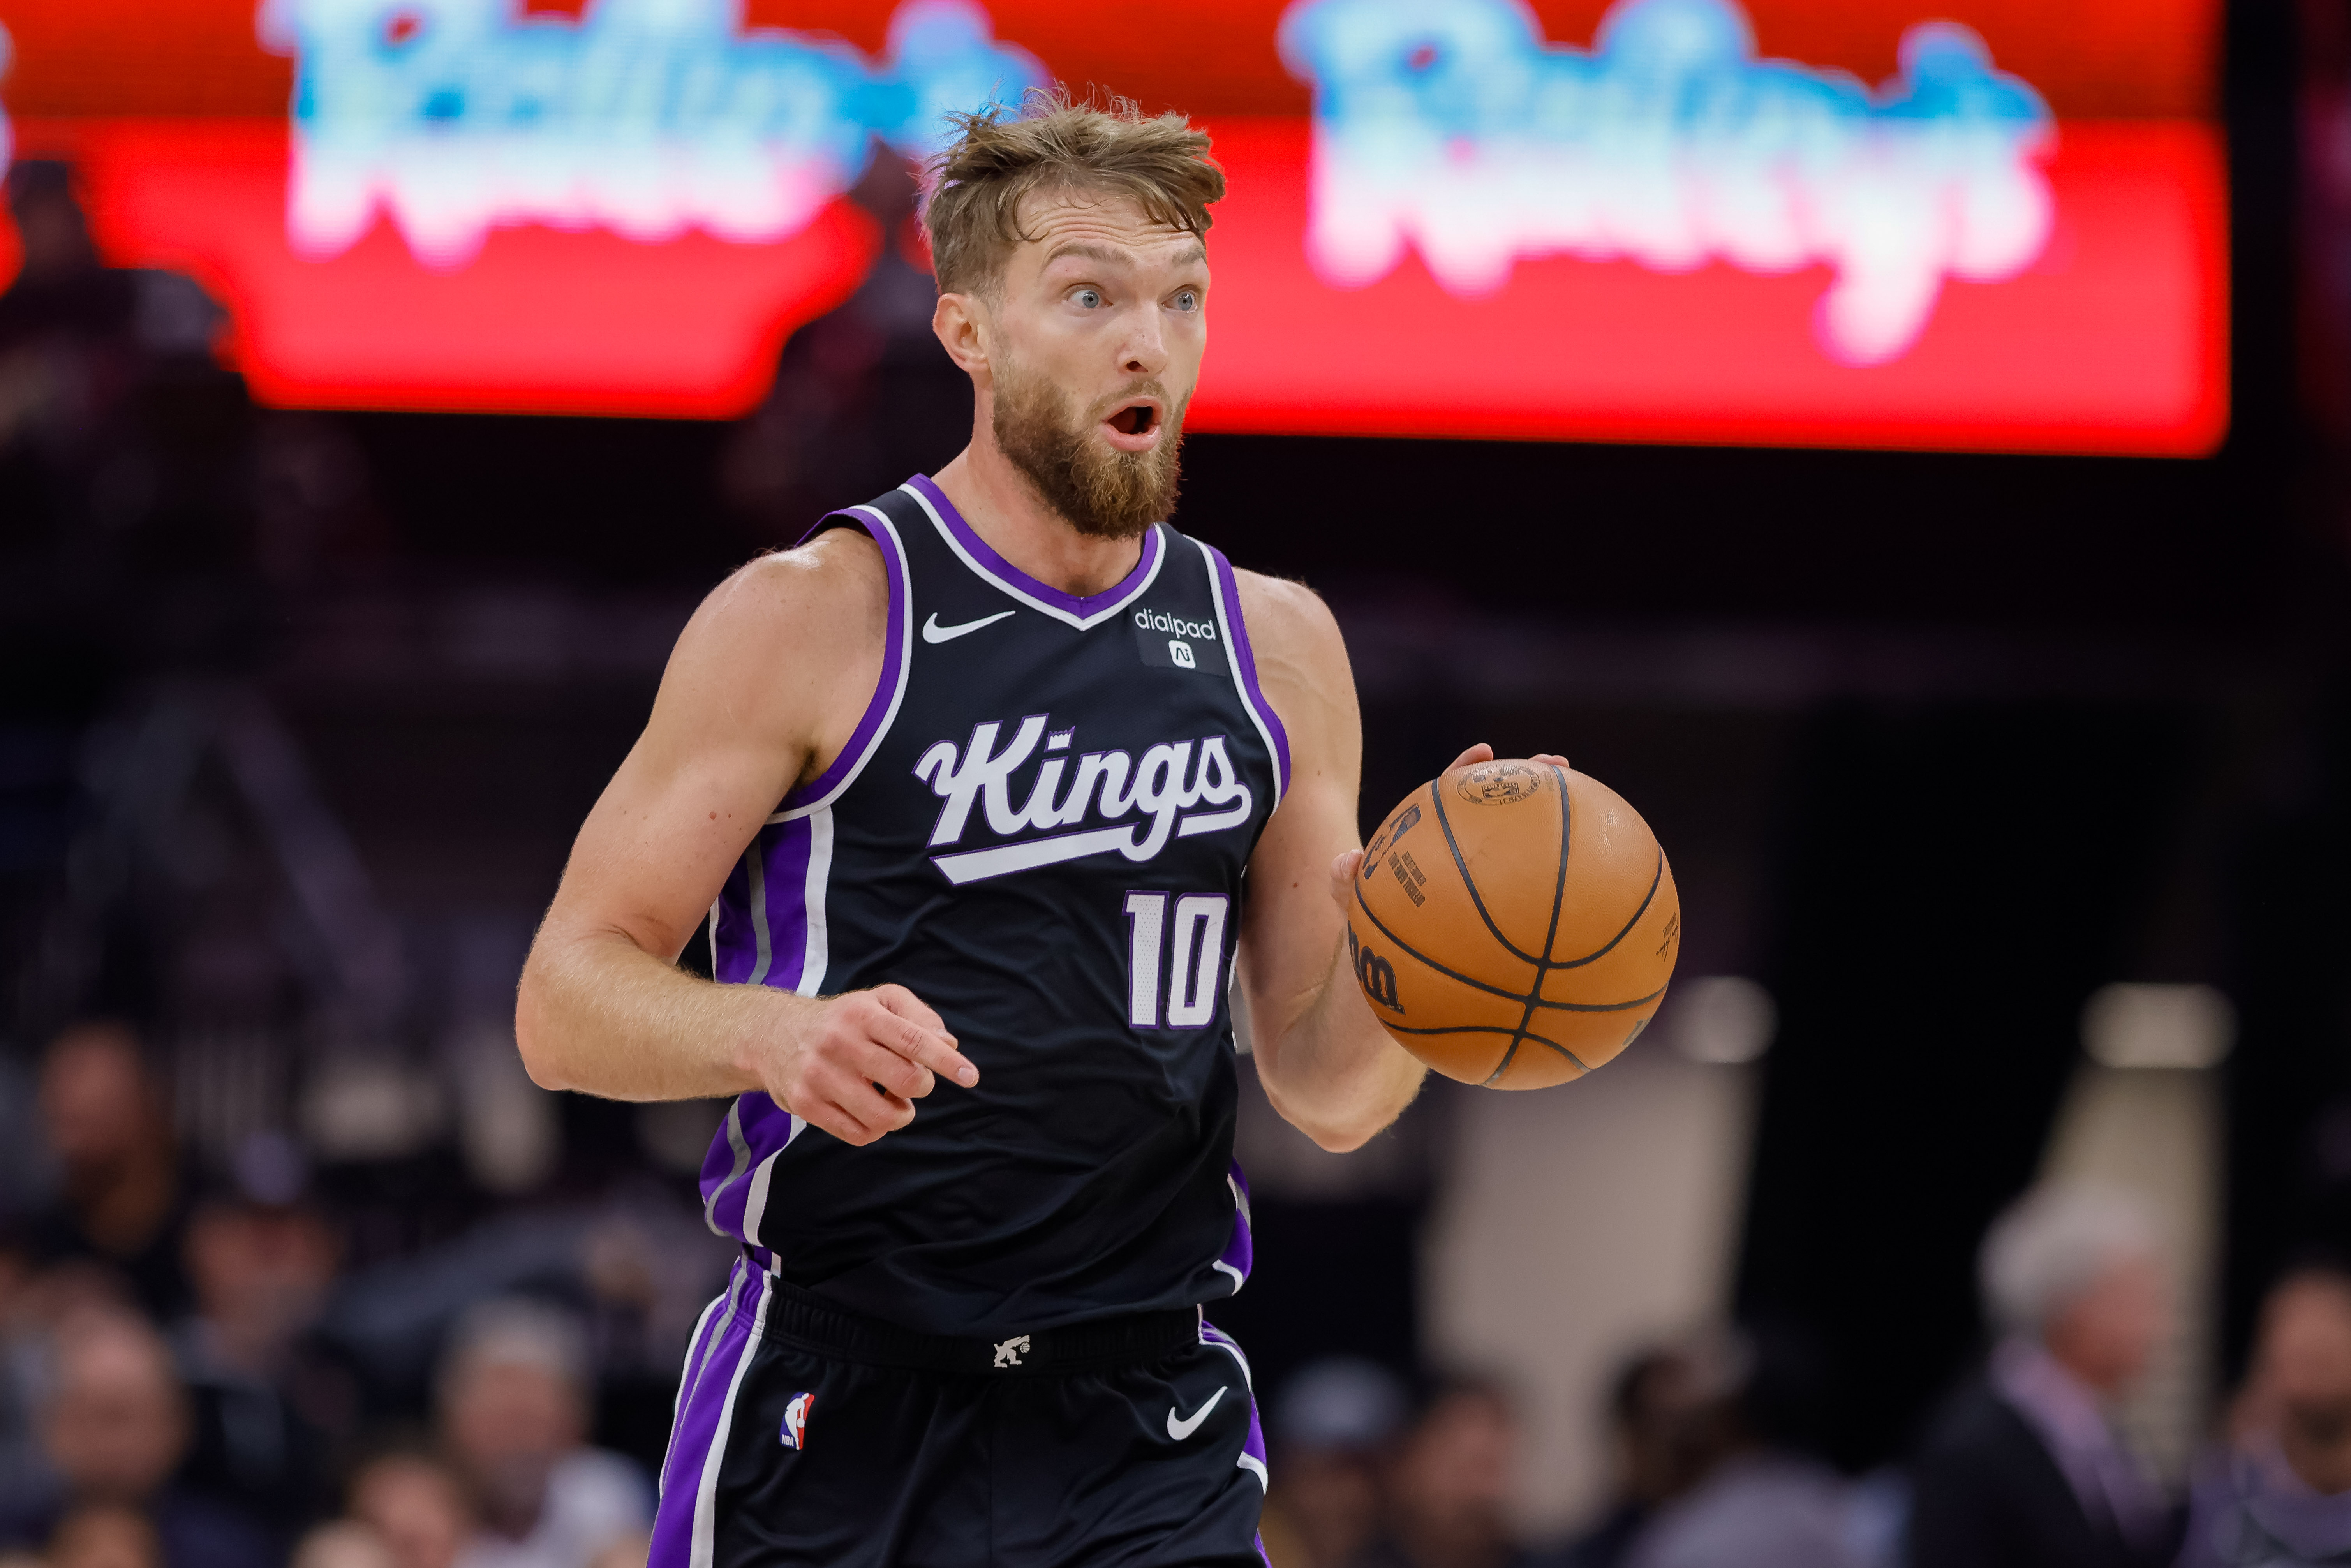 Sacramento Kings forward Domantas Sabonis (10) dribbles the ball up the court against the Golden State Warriors during the first quarter at Golden 1 Center.